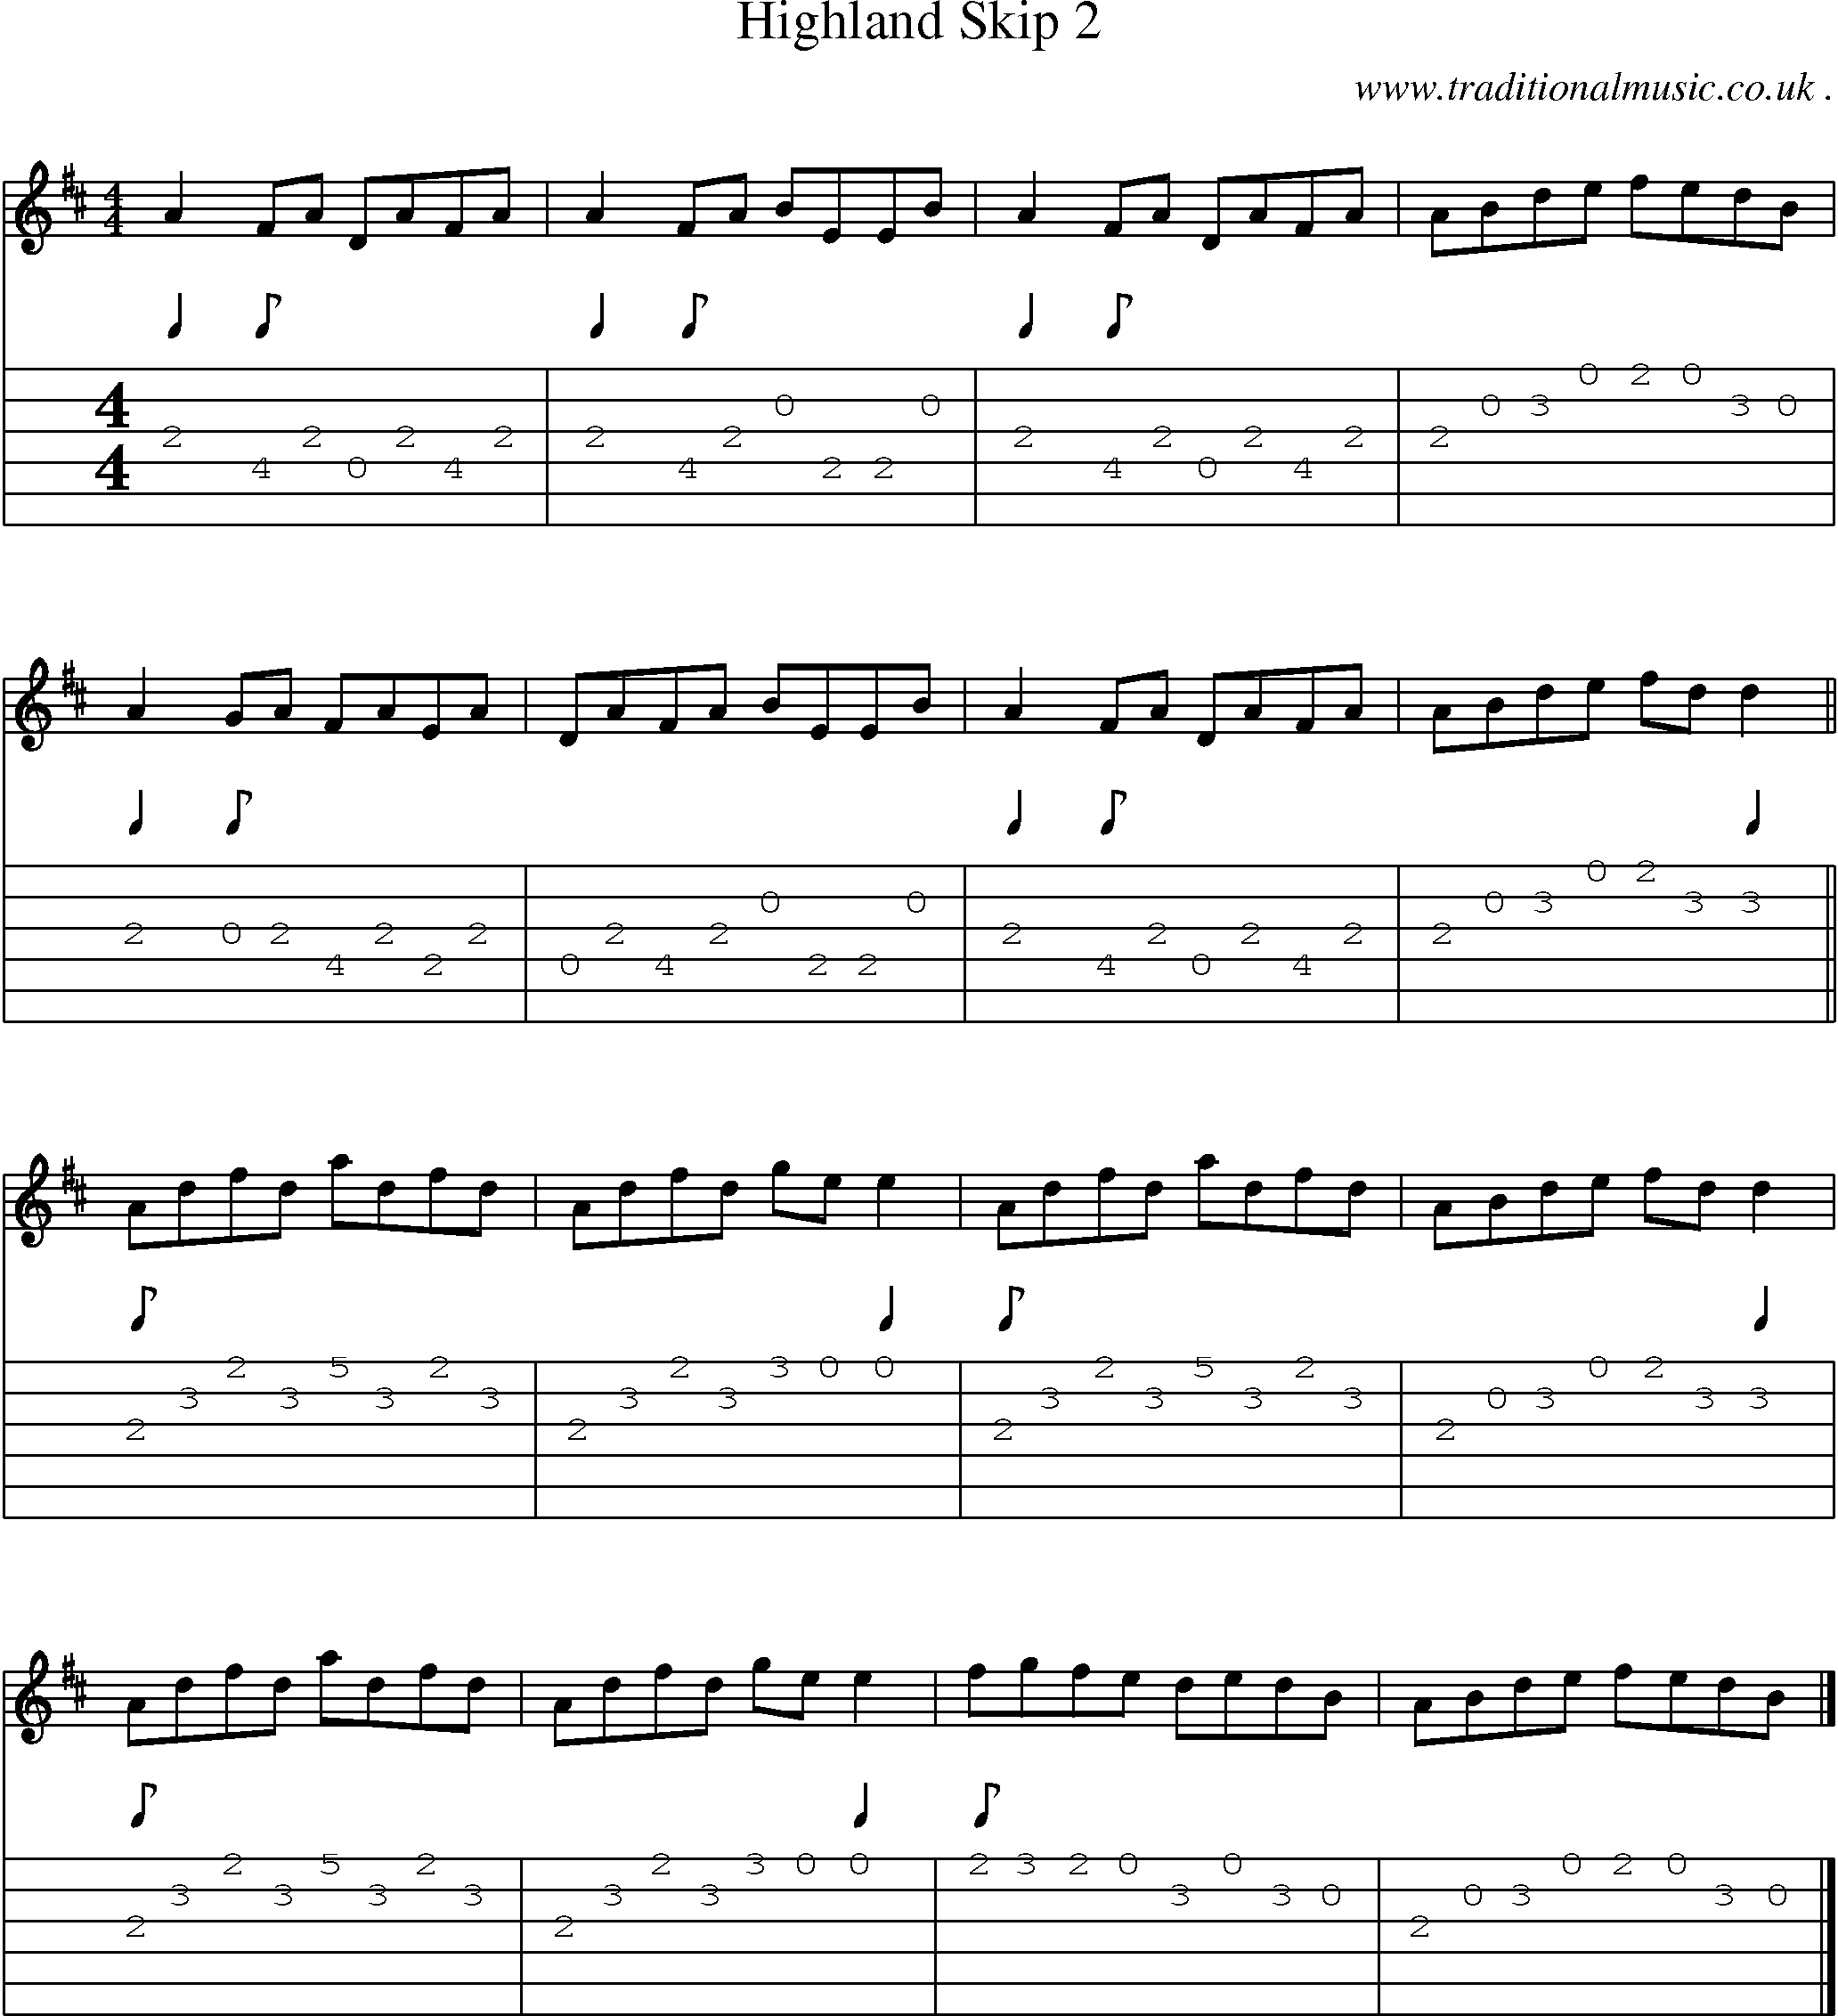 Sheet-music  score, Chords and Guitar Tabs for Highland Skip 2